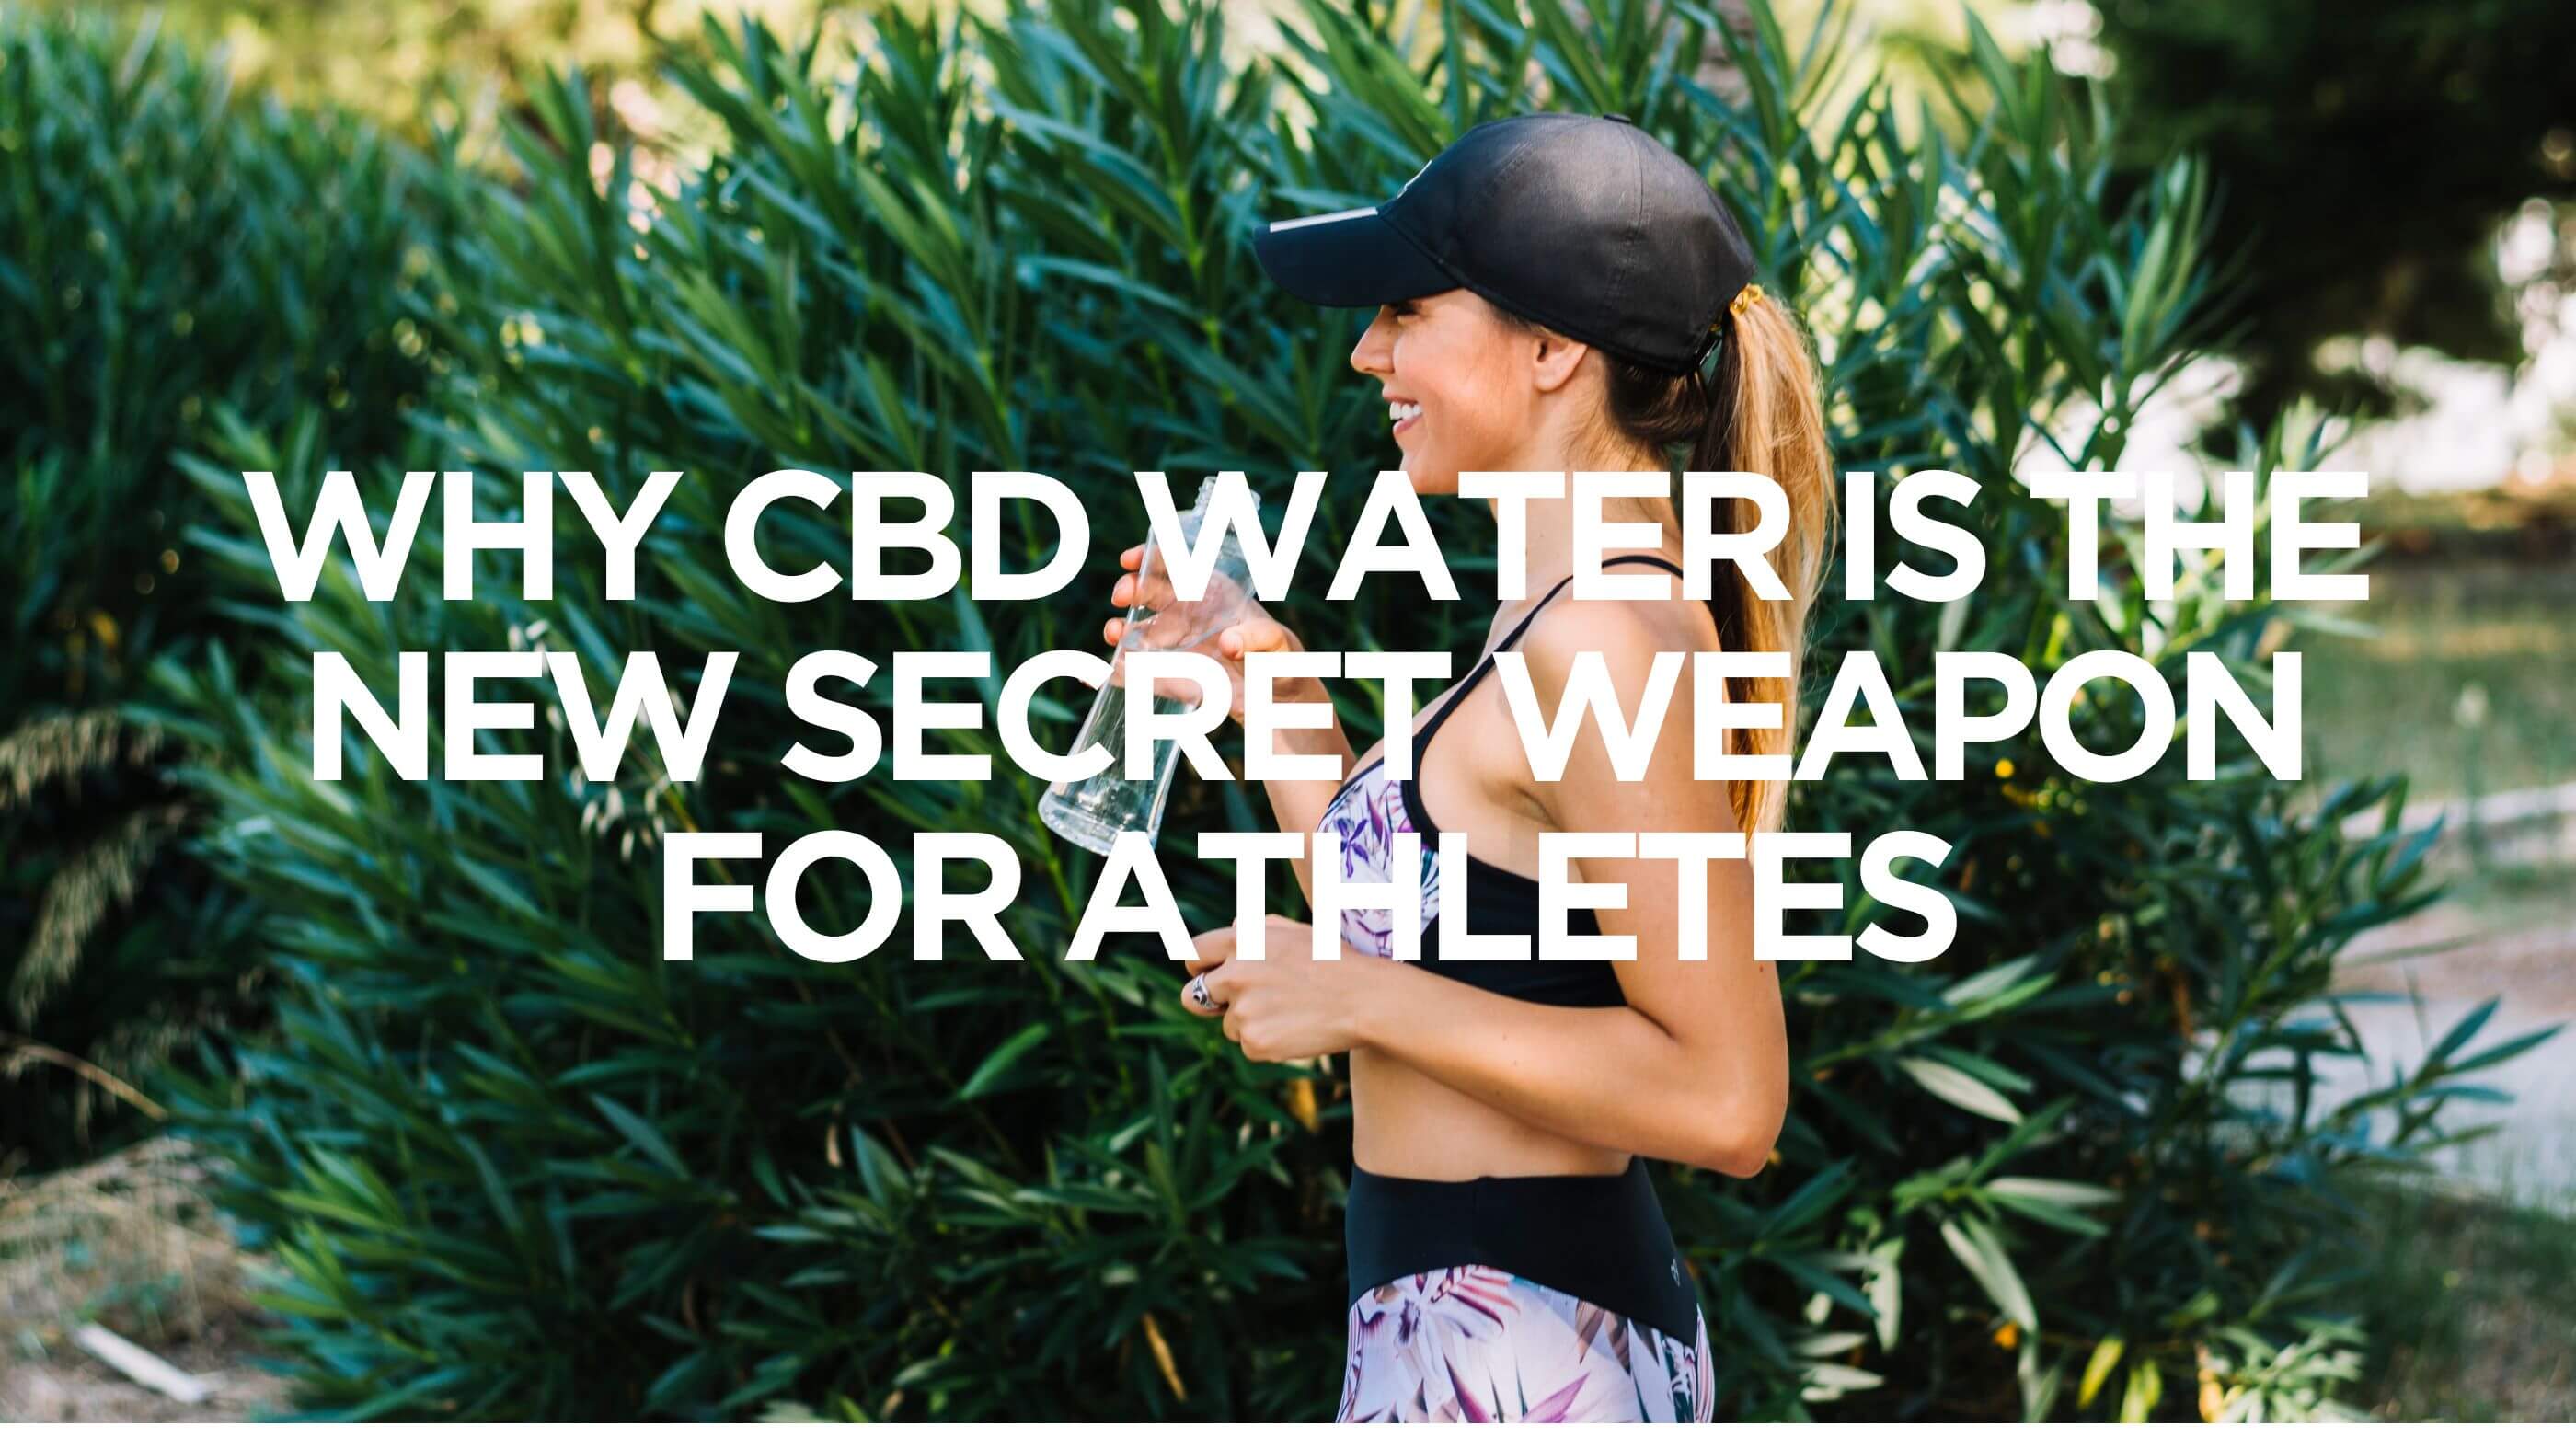 Why CBD Water is the New Secret Weapon for Athletes